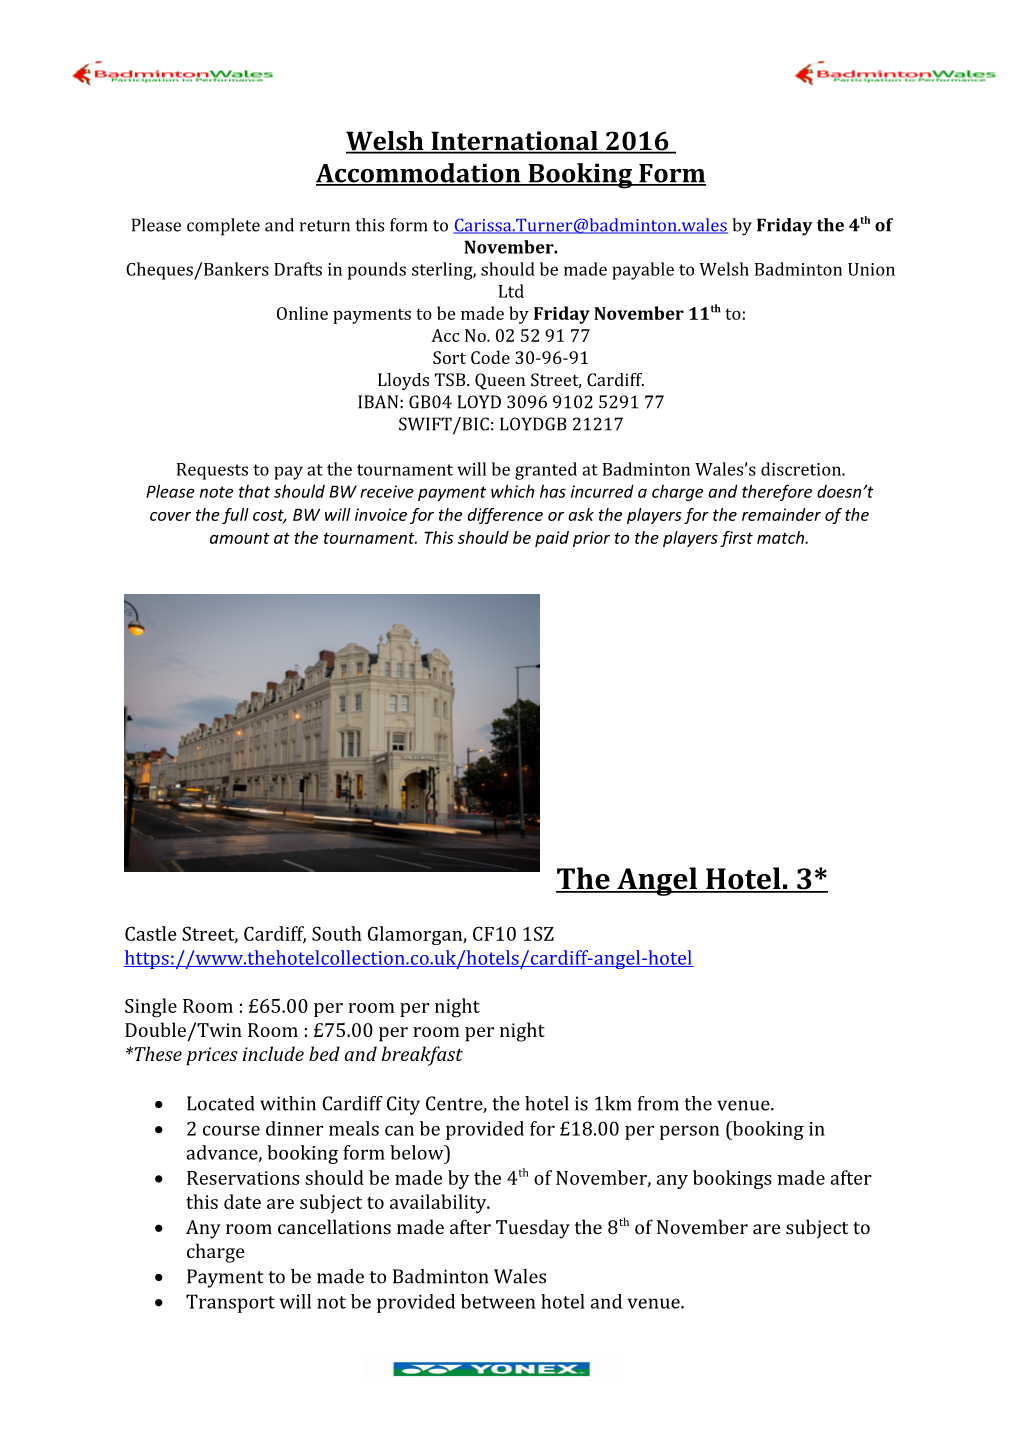 Welsh International 2016 Accommodation Booking Form